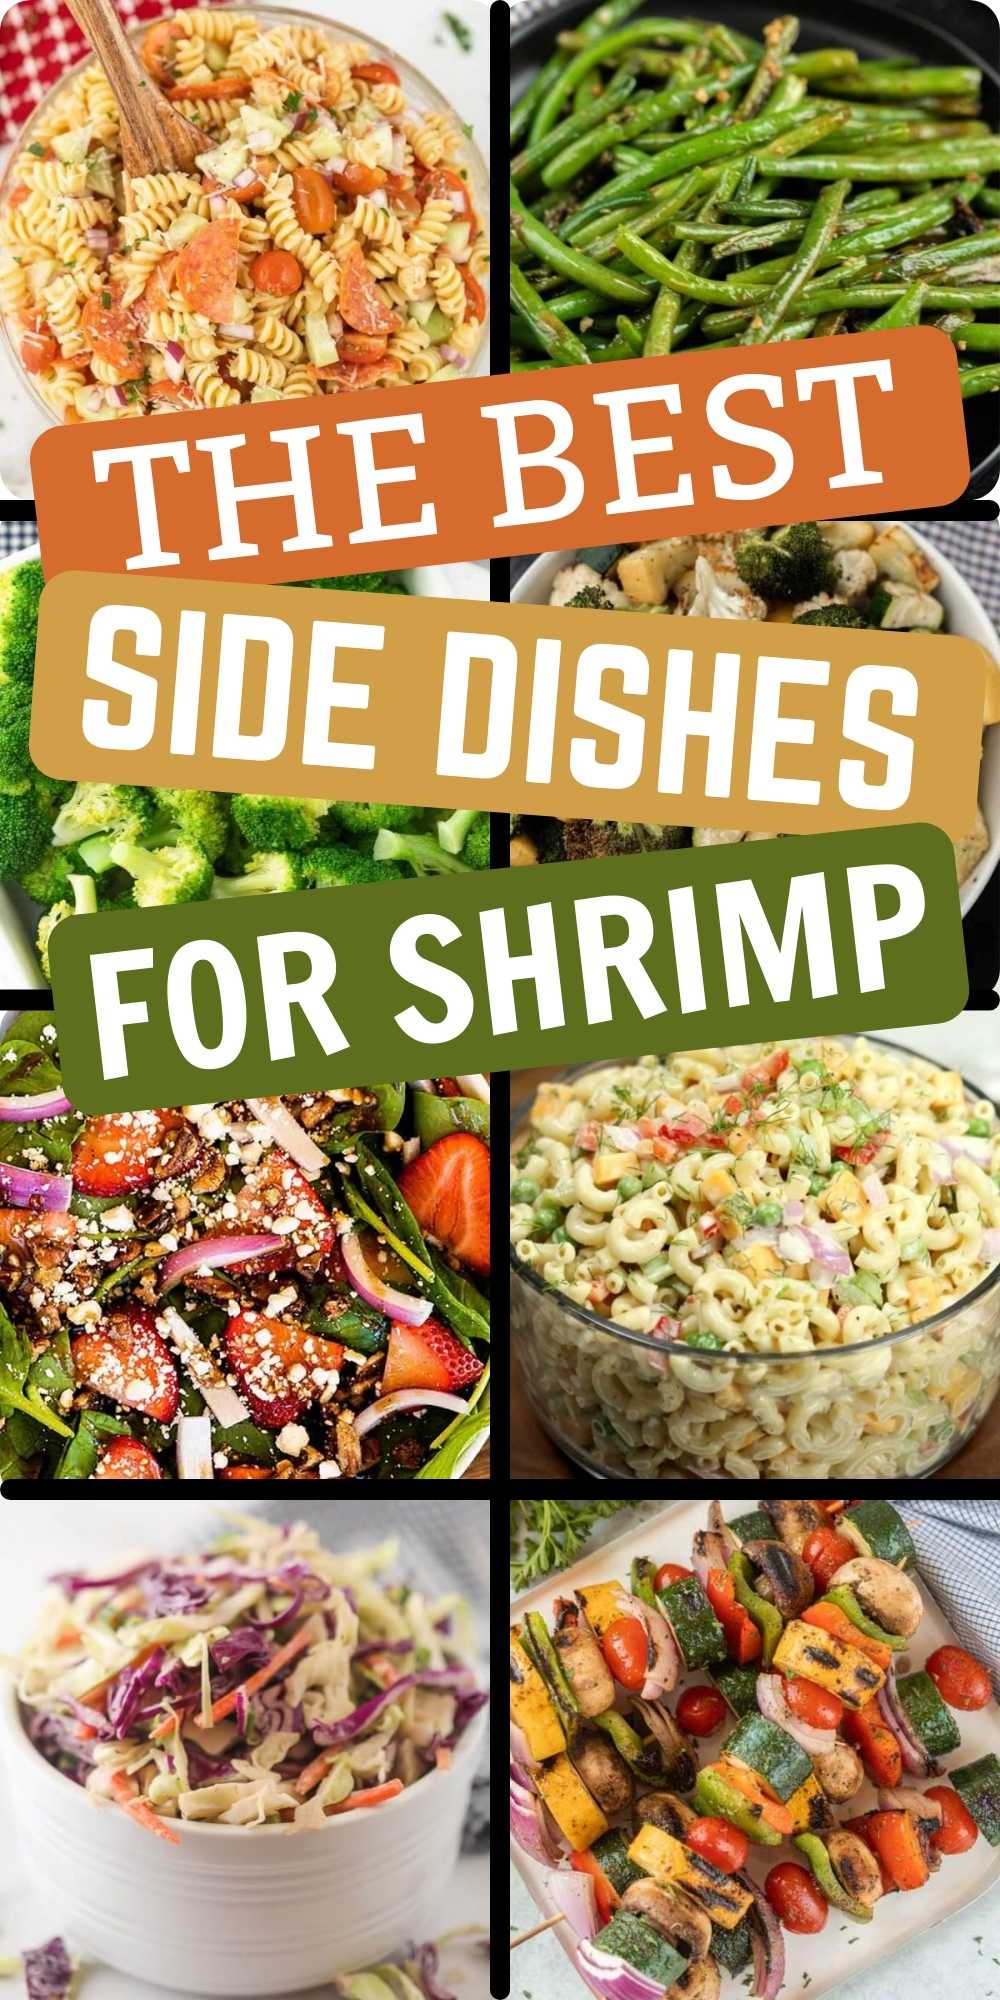 Make the Best Side Dishes for Shrimp with little effort. From comfort food to healthy options, there is something for everyone to enjoy.  Check out 31 amazing and easy side dish recipes that the entire family will love.  #eatingonadime #shrimpsides #sidedishes #shrimp 
